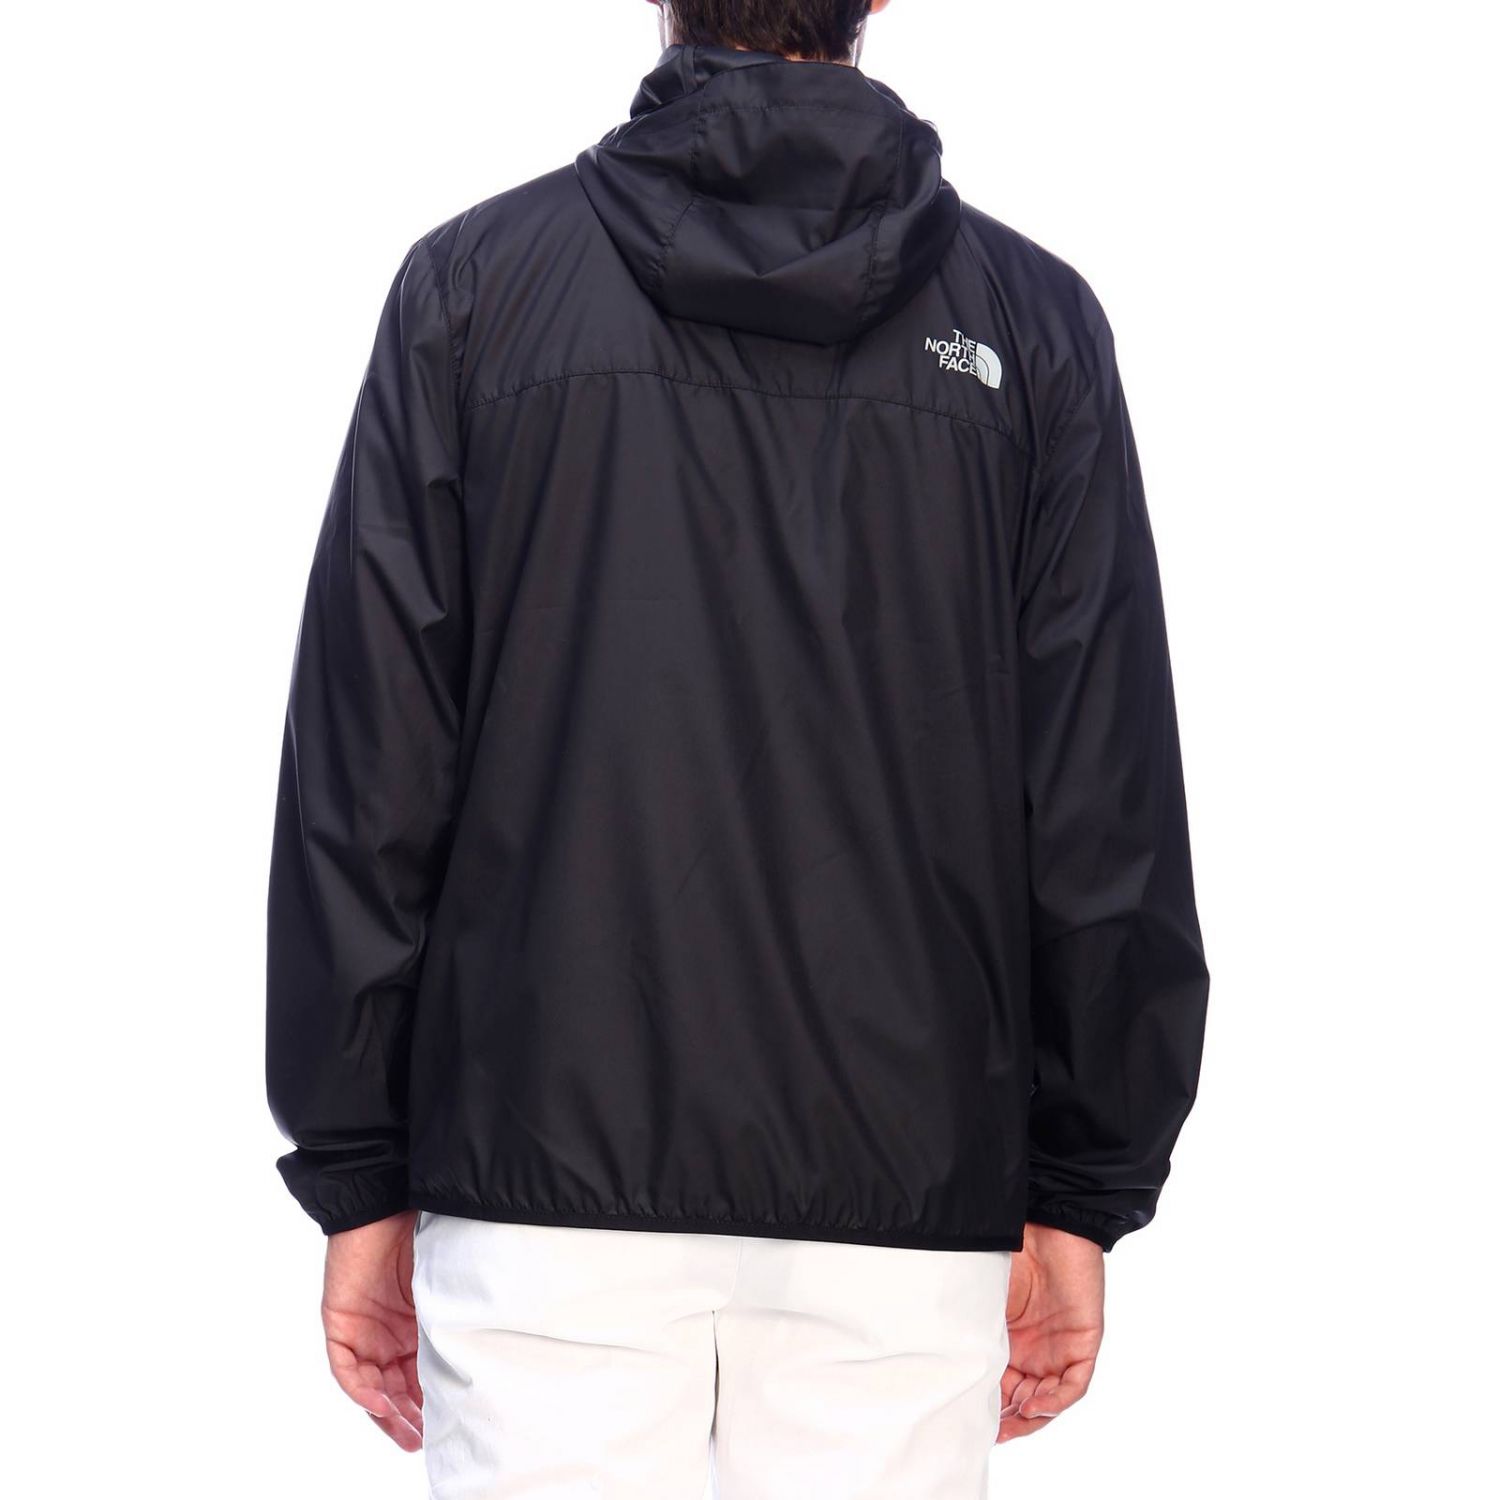 The North Face Outlet: Coat men - Black | Coat The North Face T92VD9 ...